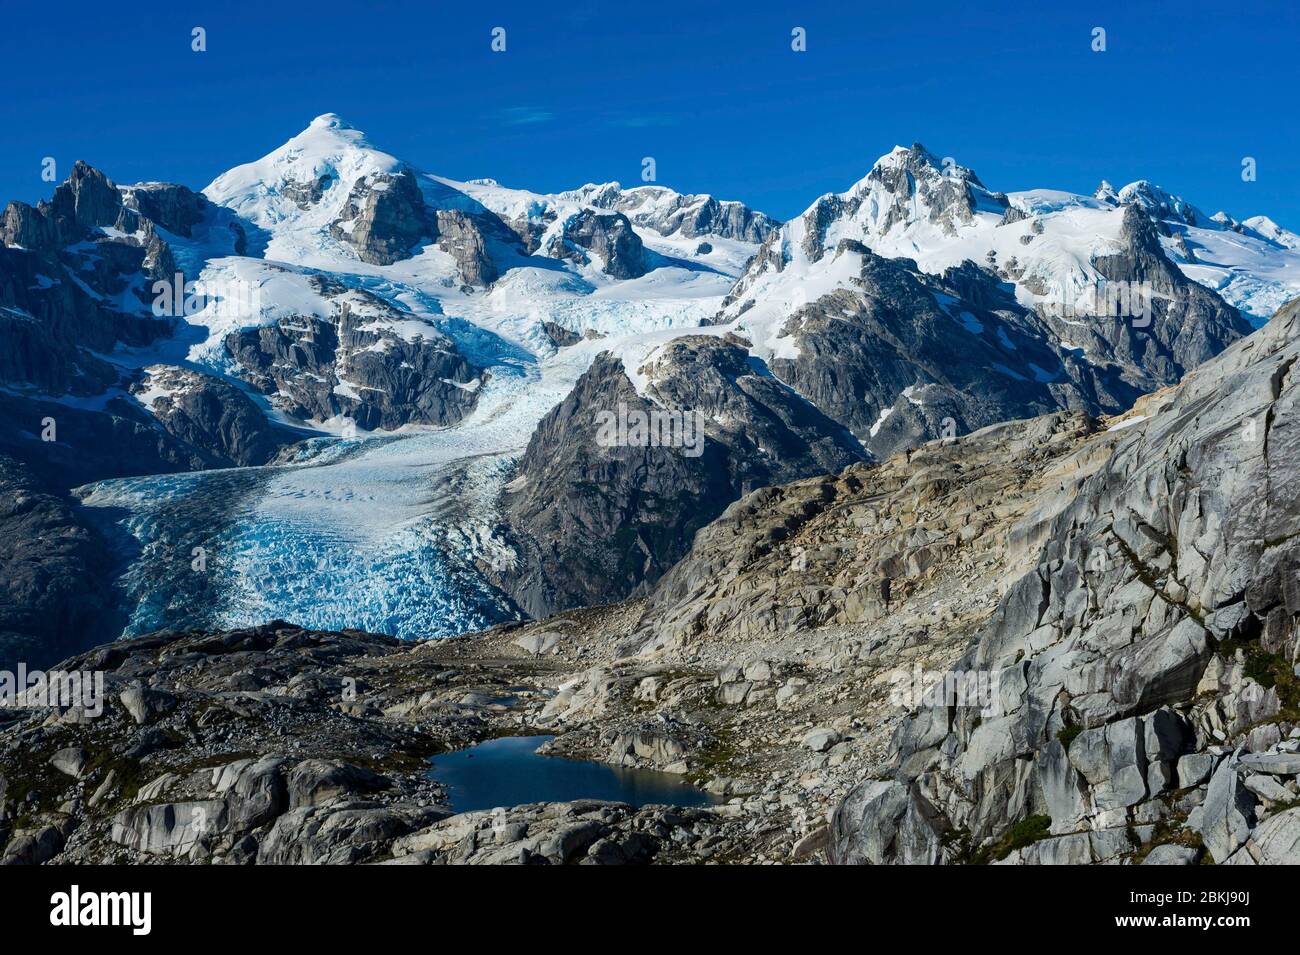 Chile, Patagonia, Aysen, Coyhaique, in the glacial folds of the St Valentin massif Stock Photo